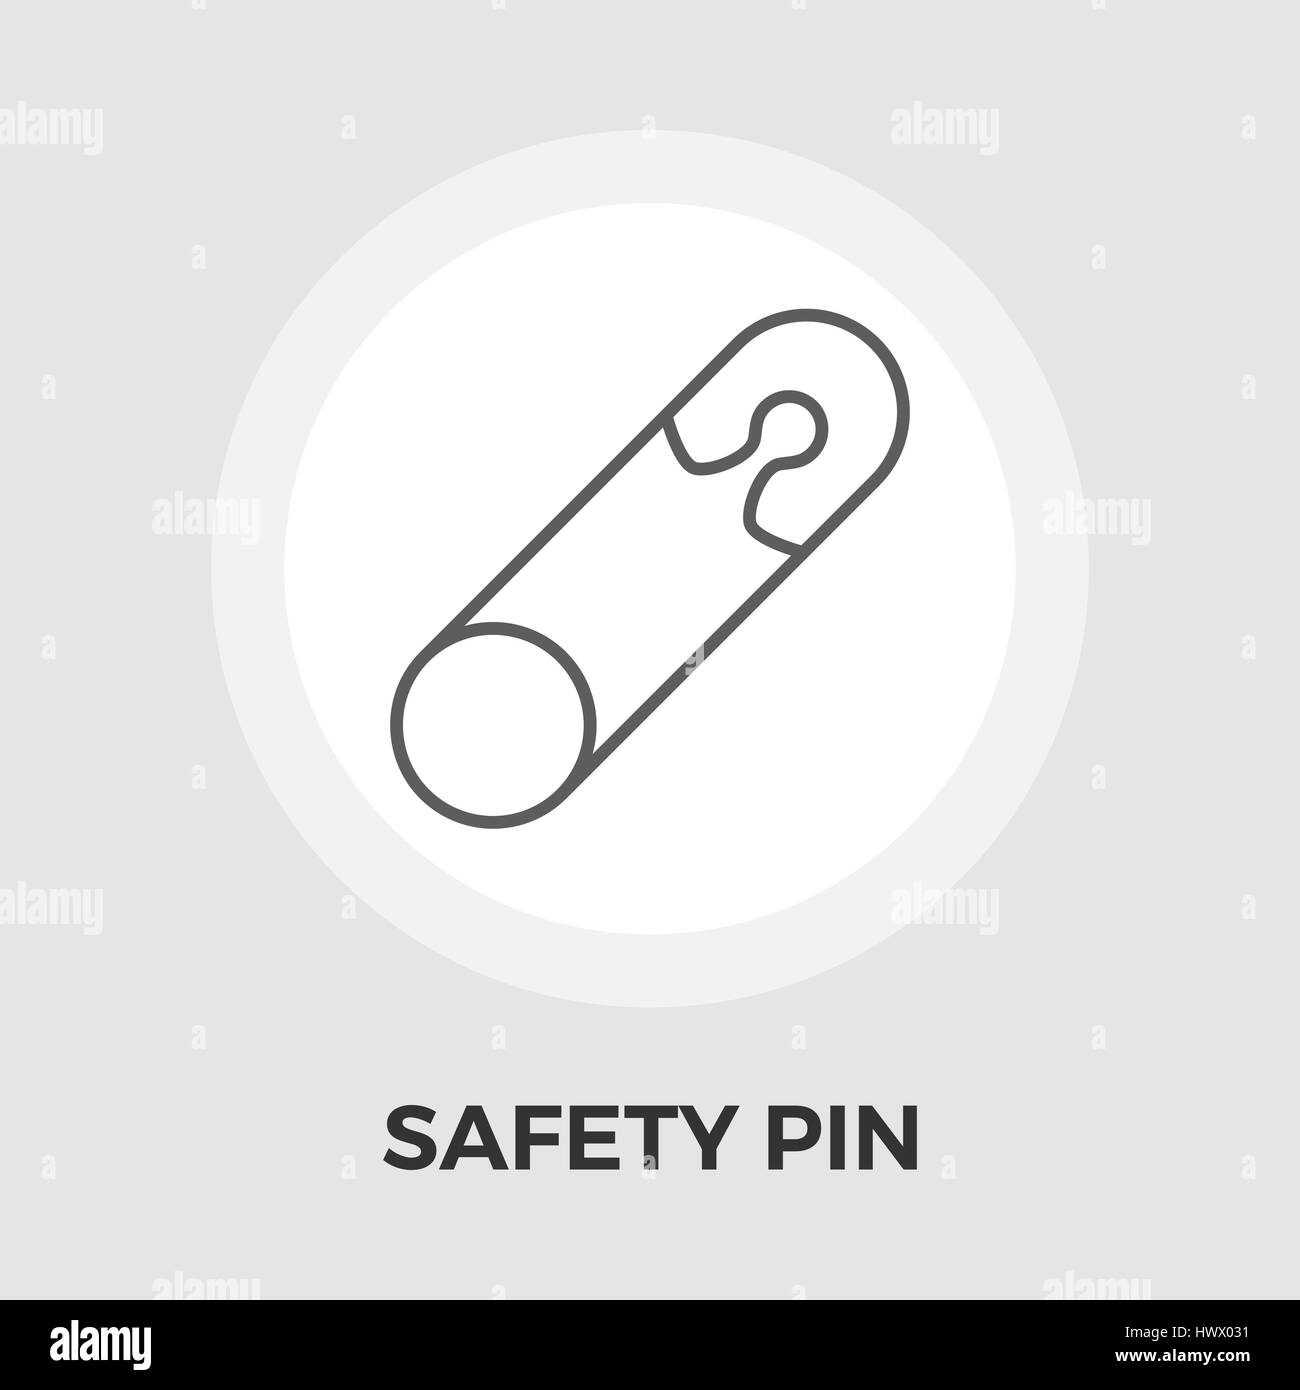 Safety pins Black and White Stock Photos & Images - Alamy